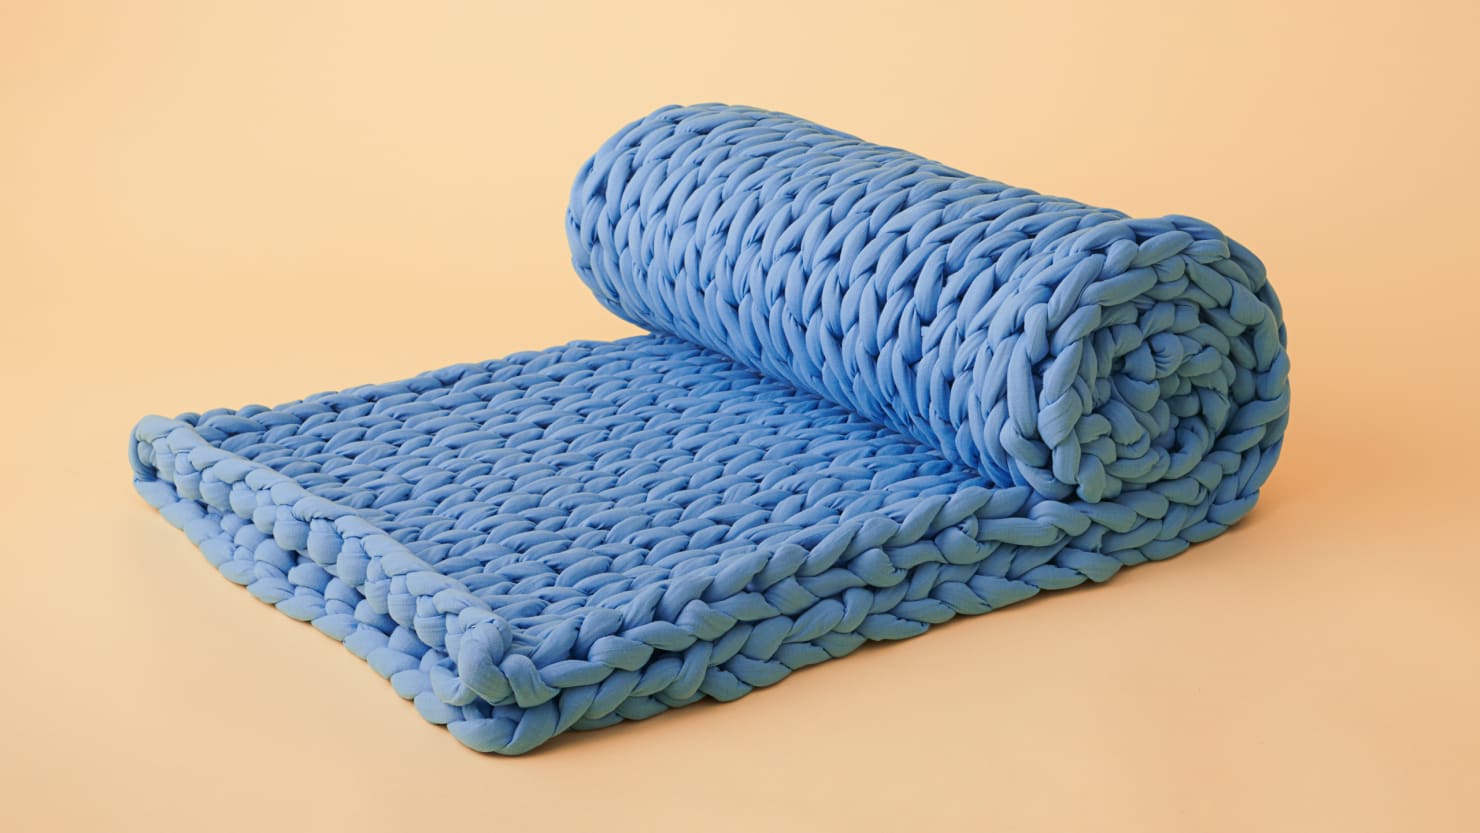 This Is the Best Looking Weighted Blanket Out There